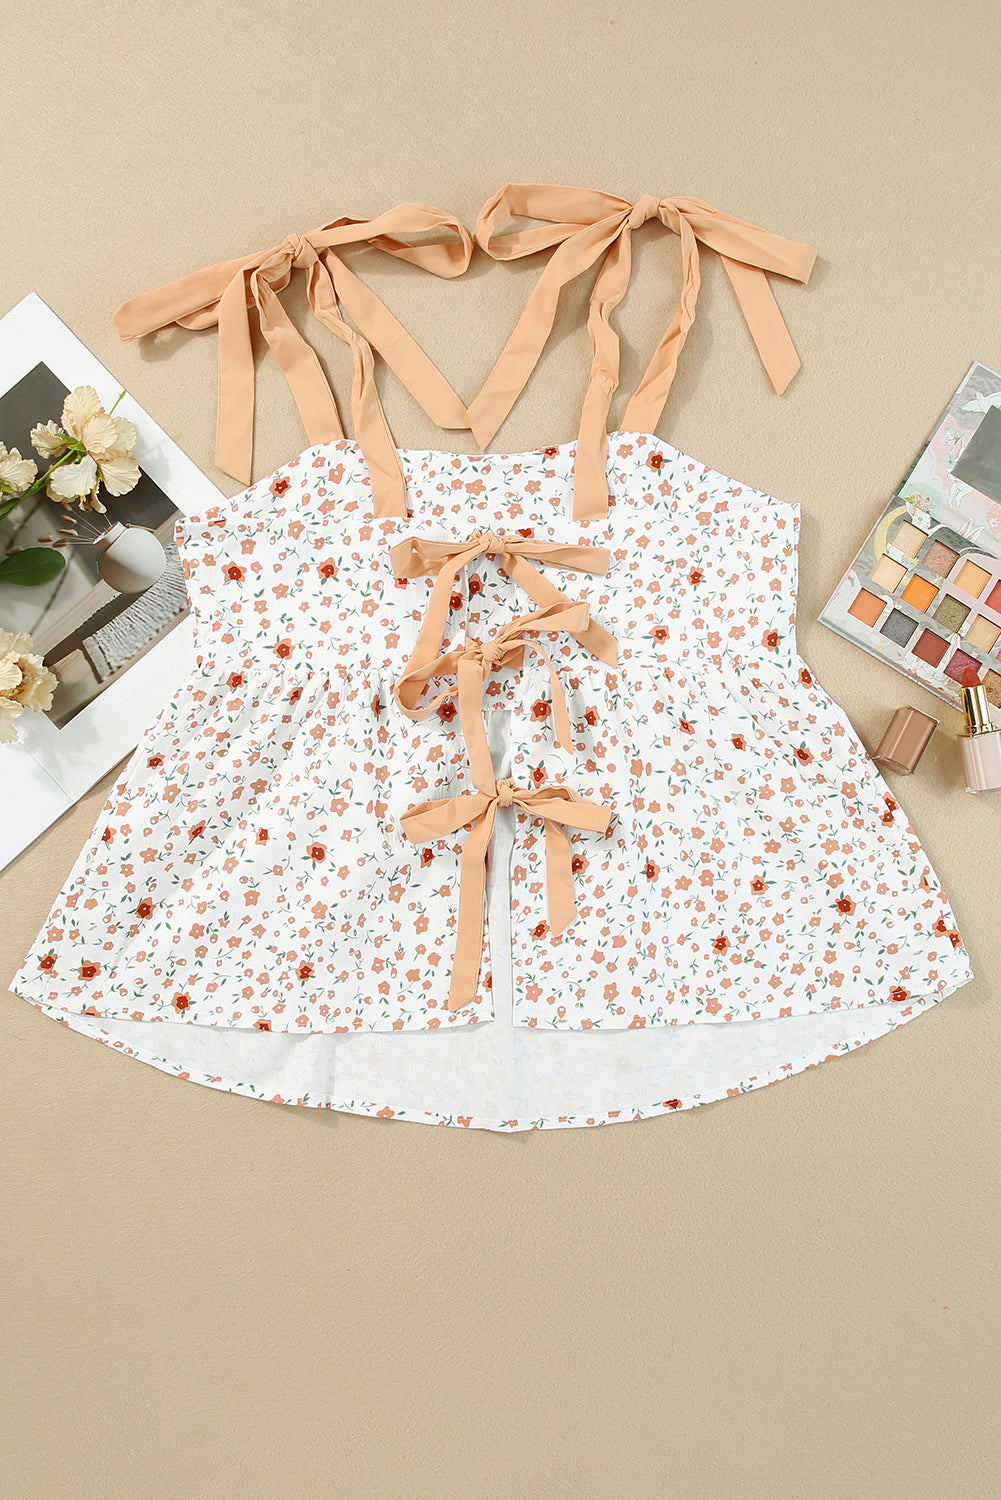 Canotta babydoll con stampa floreale bianca sulle spalle